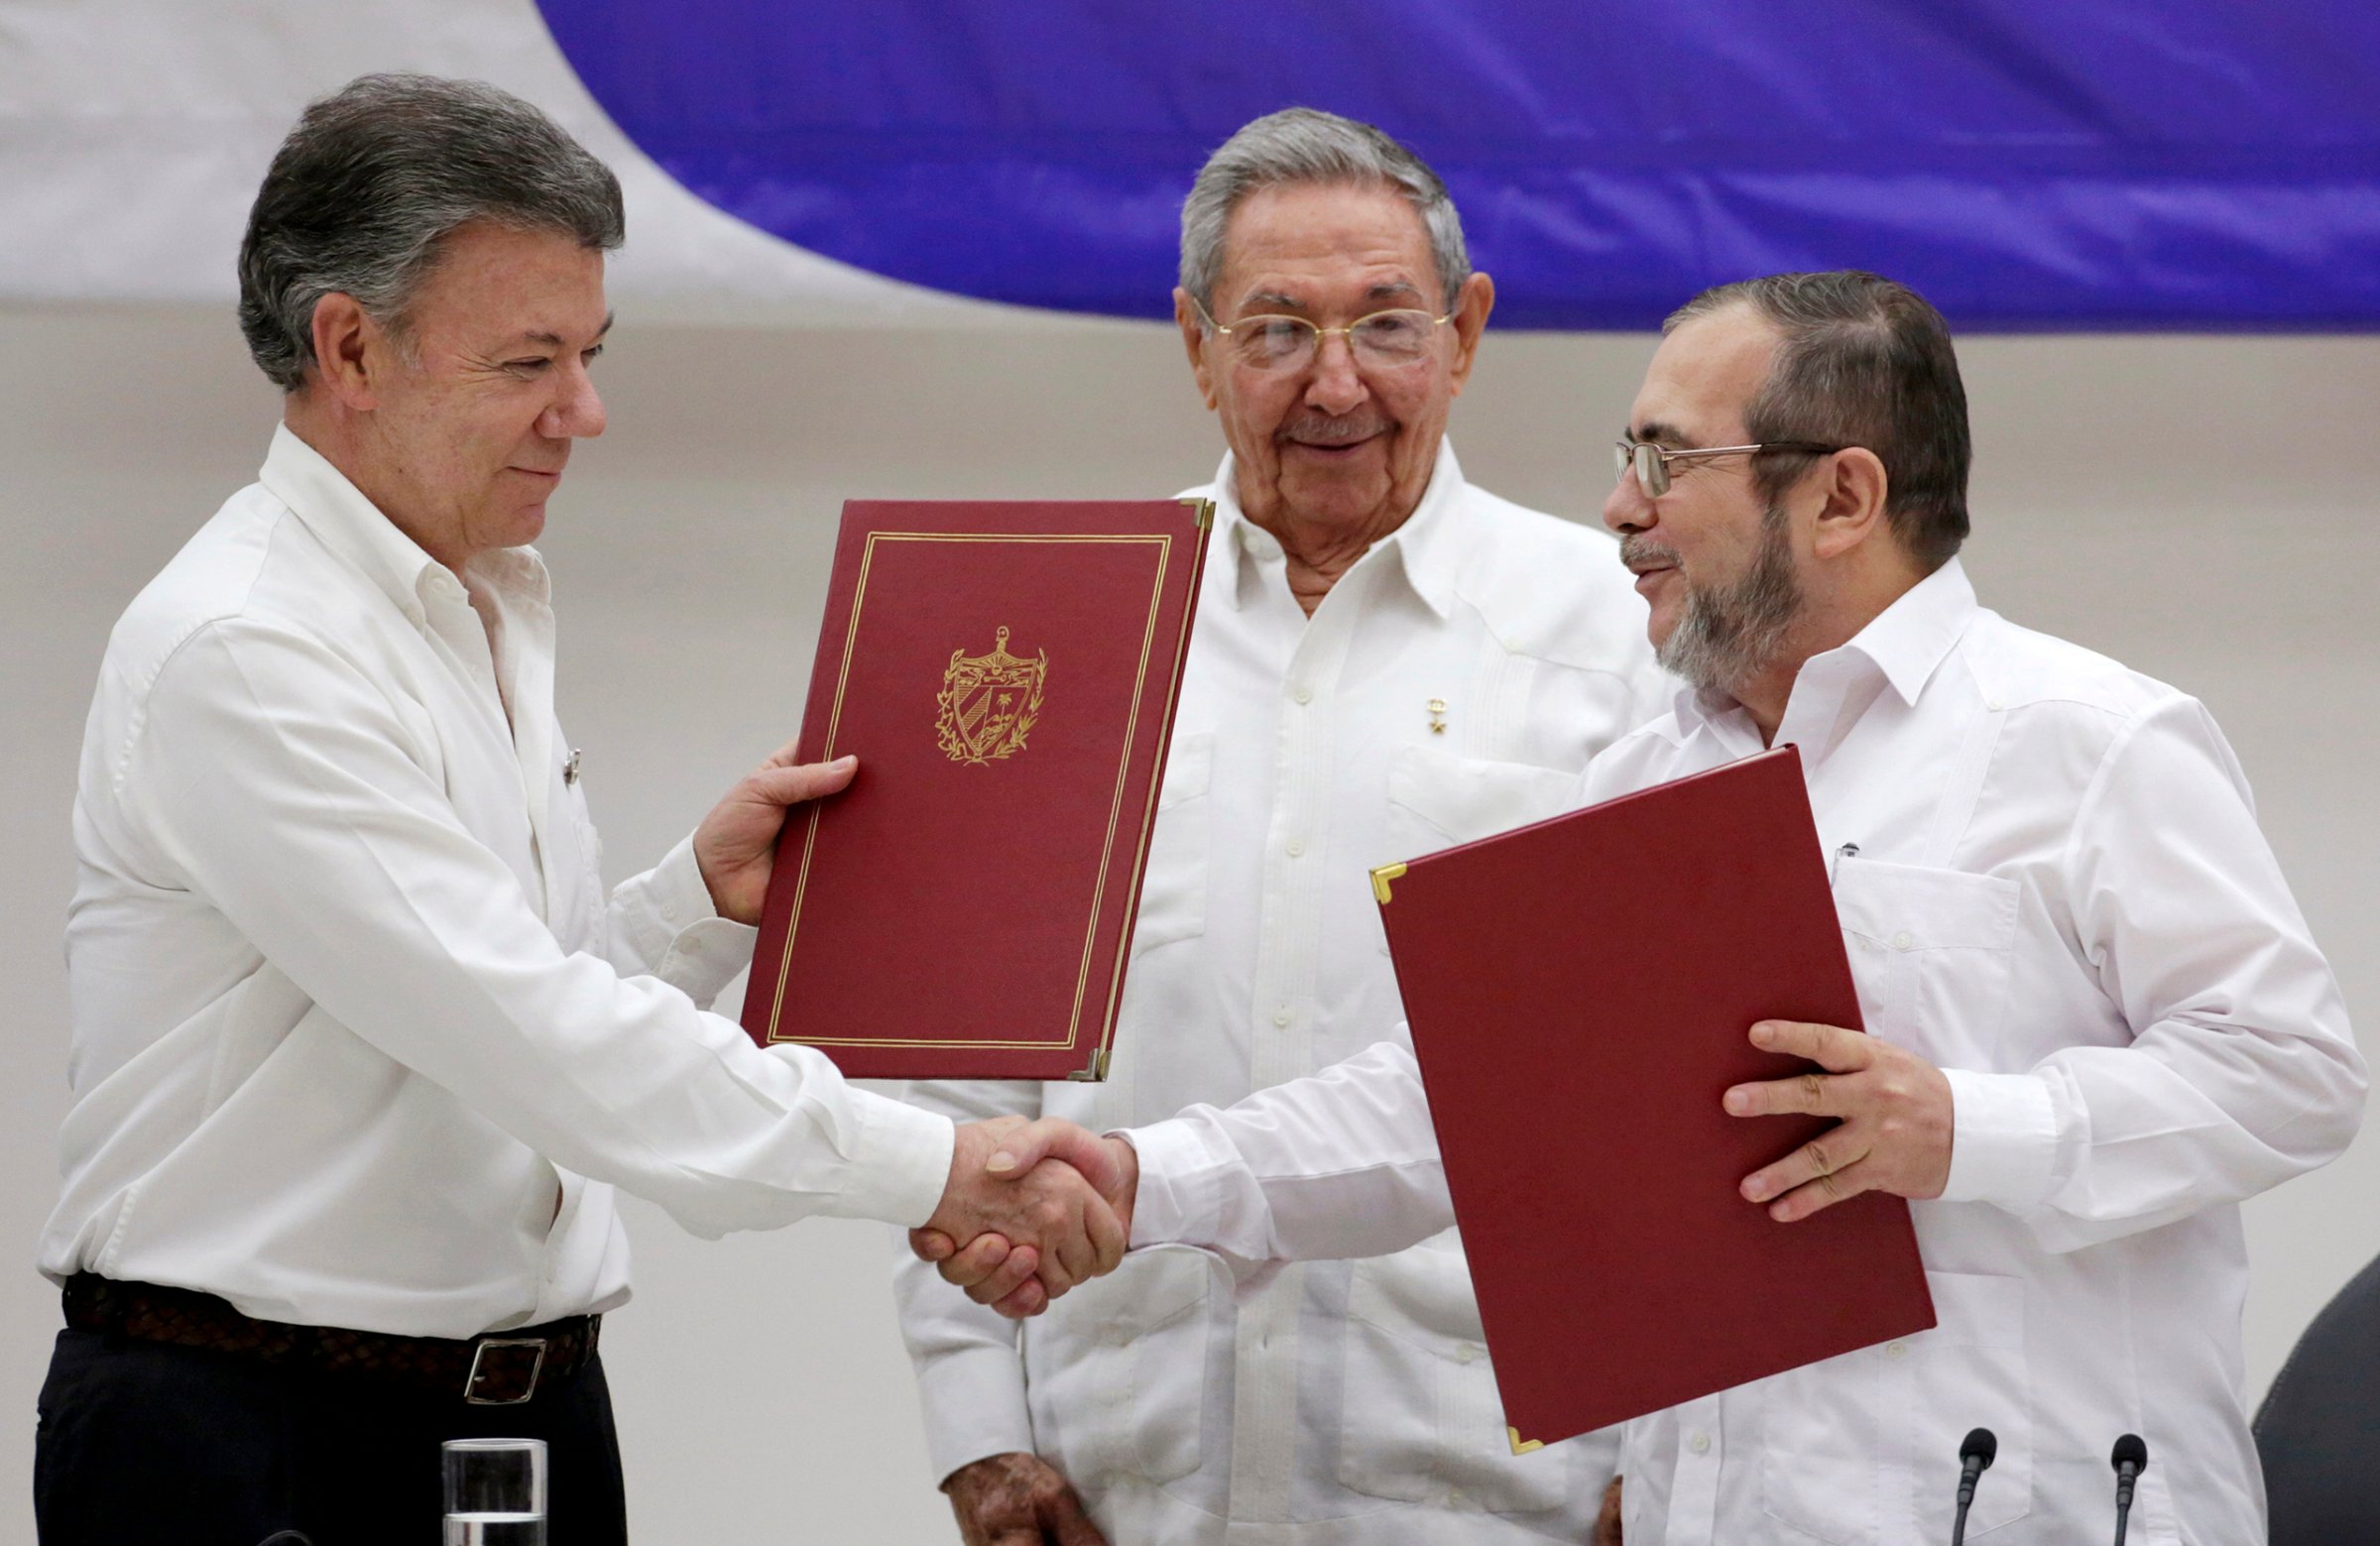 Colombia's President Juan Manuel Santos, left, shakes hands with FARC rebel leader Rodrigo Londono, better known by his nom de guerre Timochenko, right, as Cuba's President Raul Castro looks on after the signing of a historic ceasefire deal between the Colombian government and FARC rebels in Havana, Cuba, on June 23, 2016.